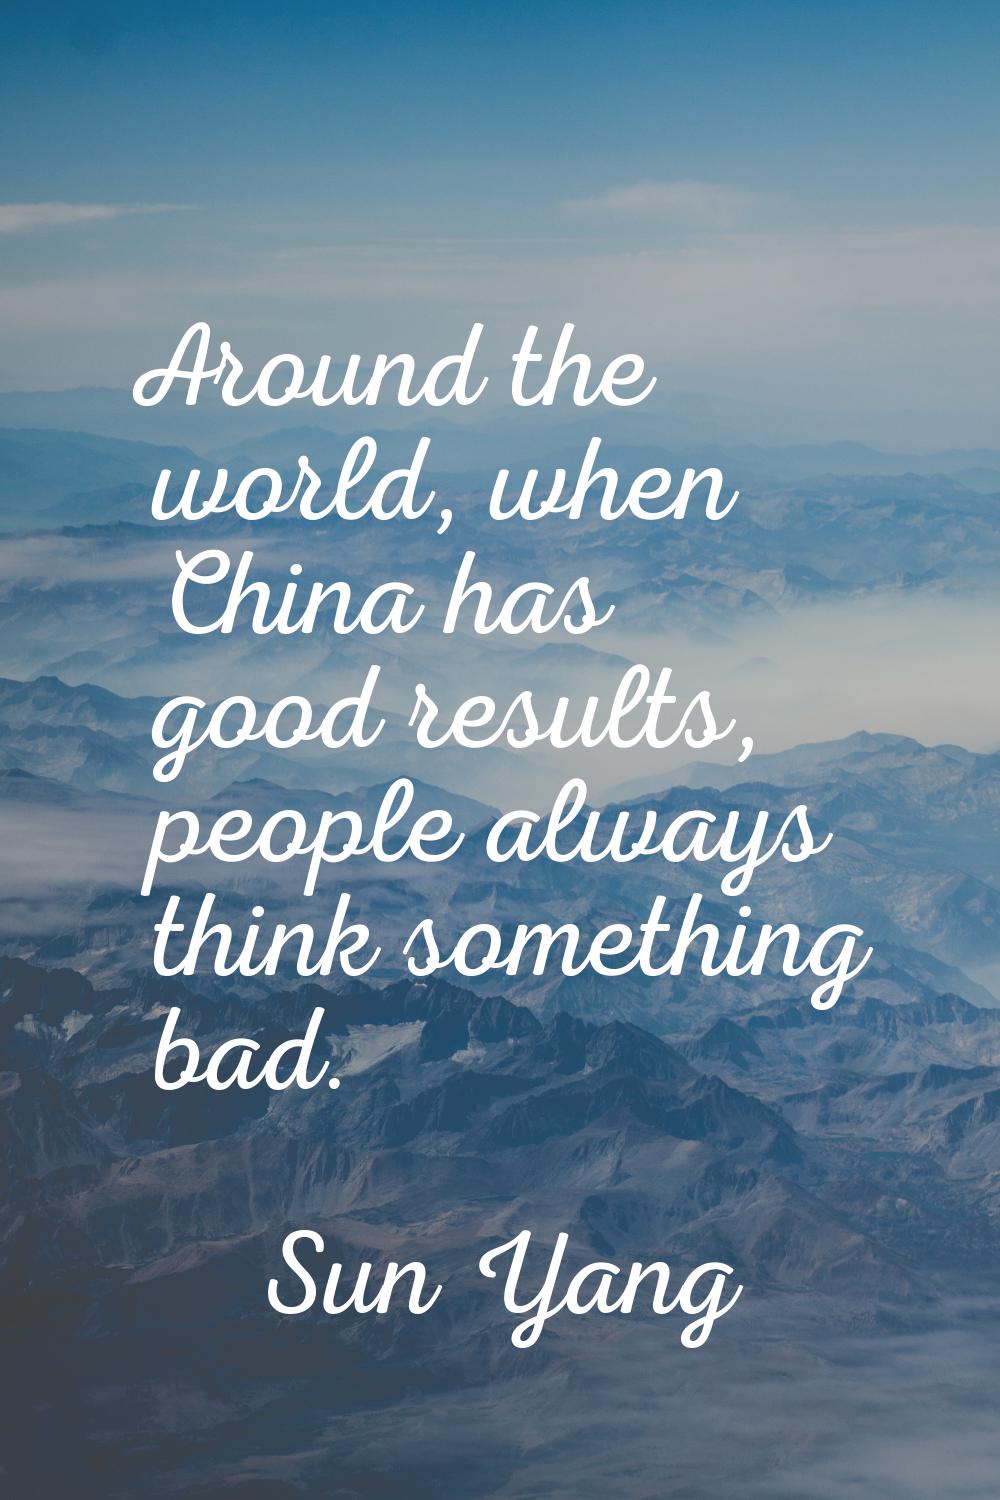 Around the world, when China has good results, people always think something bad.